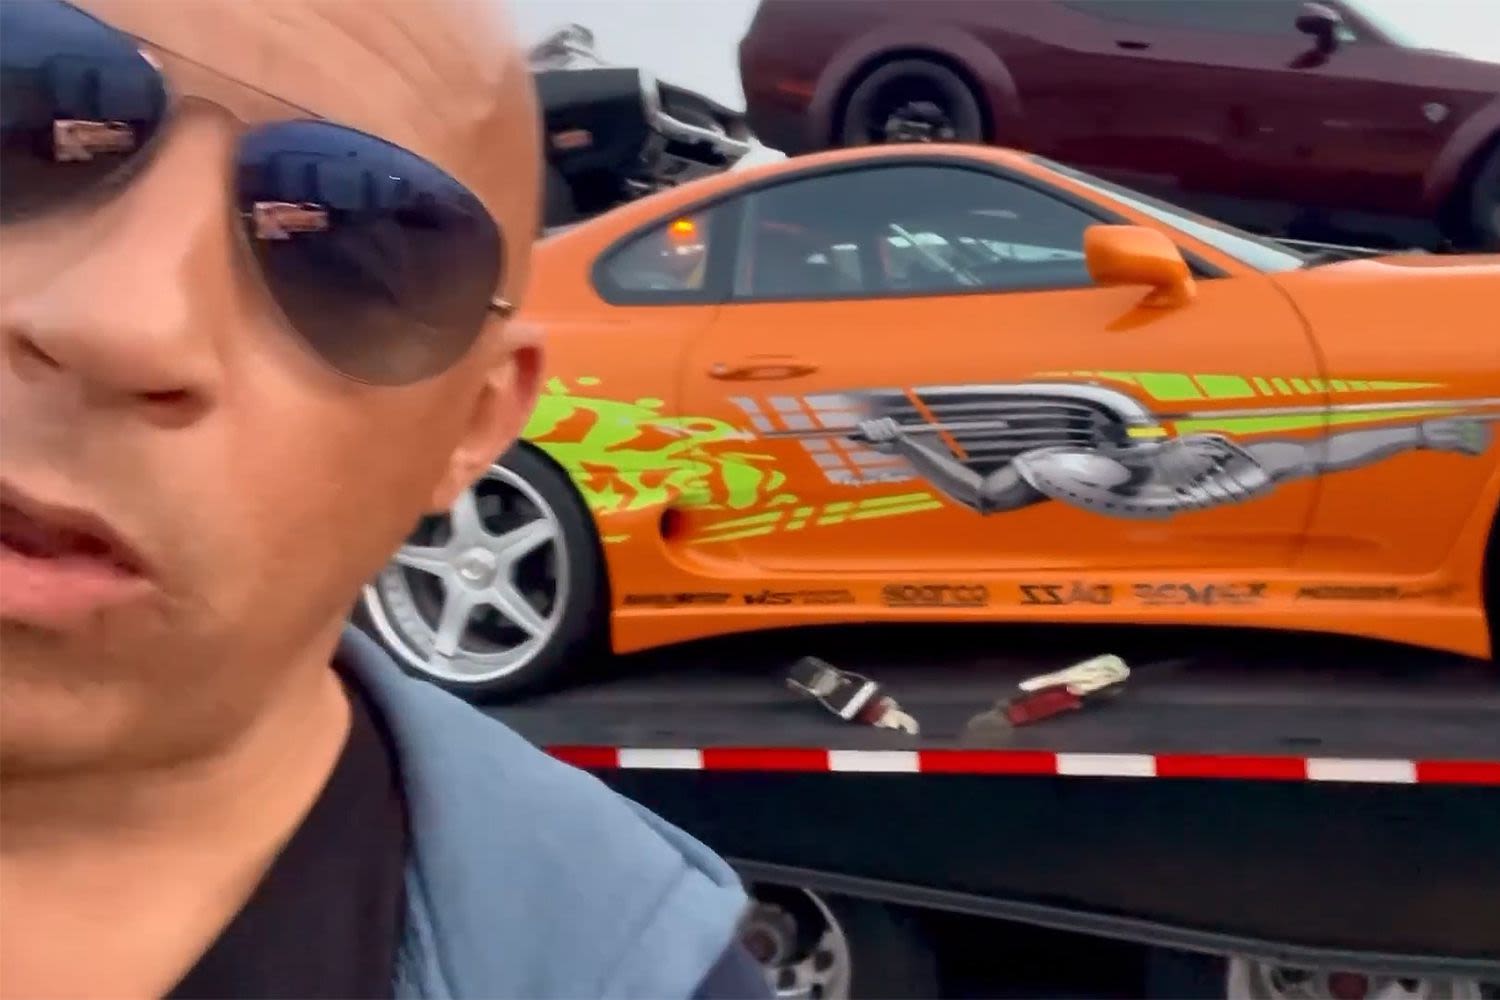 Vin Diesel Reunites with Paul Walker's Toyota Supra from 2001's 'The Fast and the Furious': 'Holds a Special Place in My Heart'